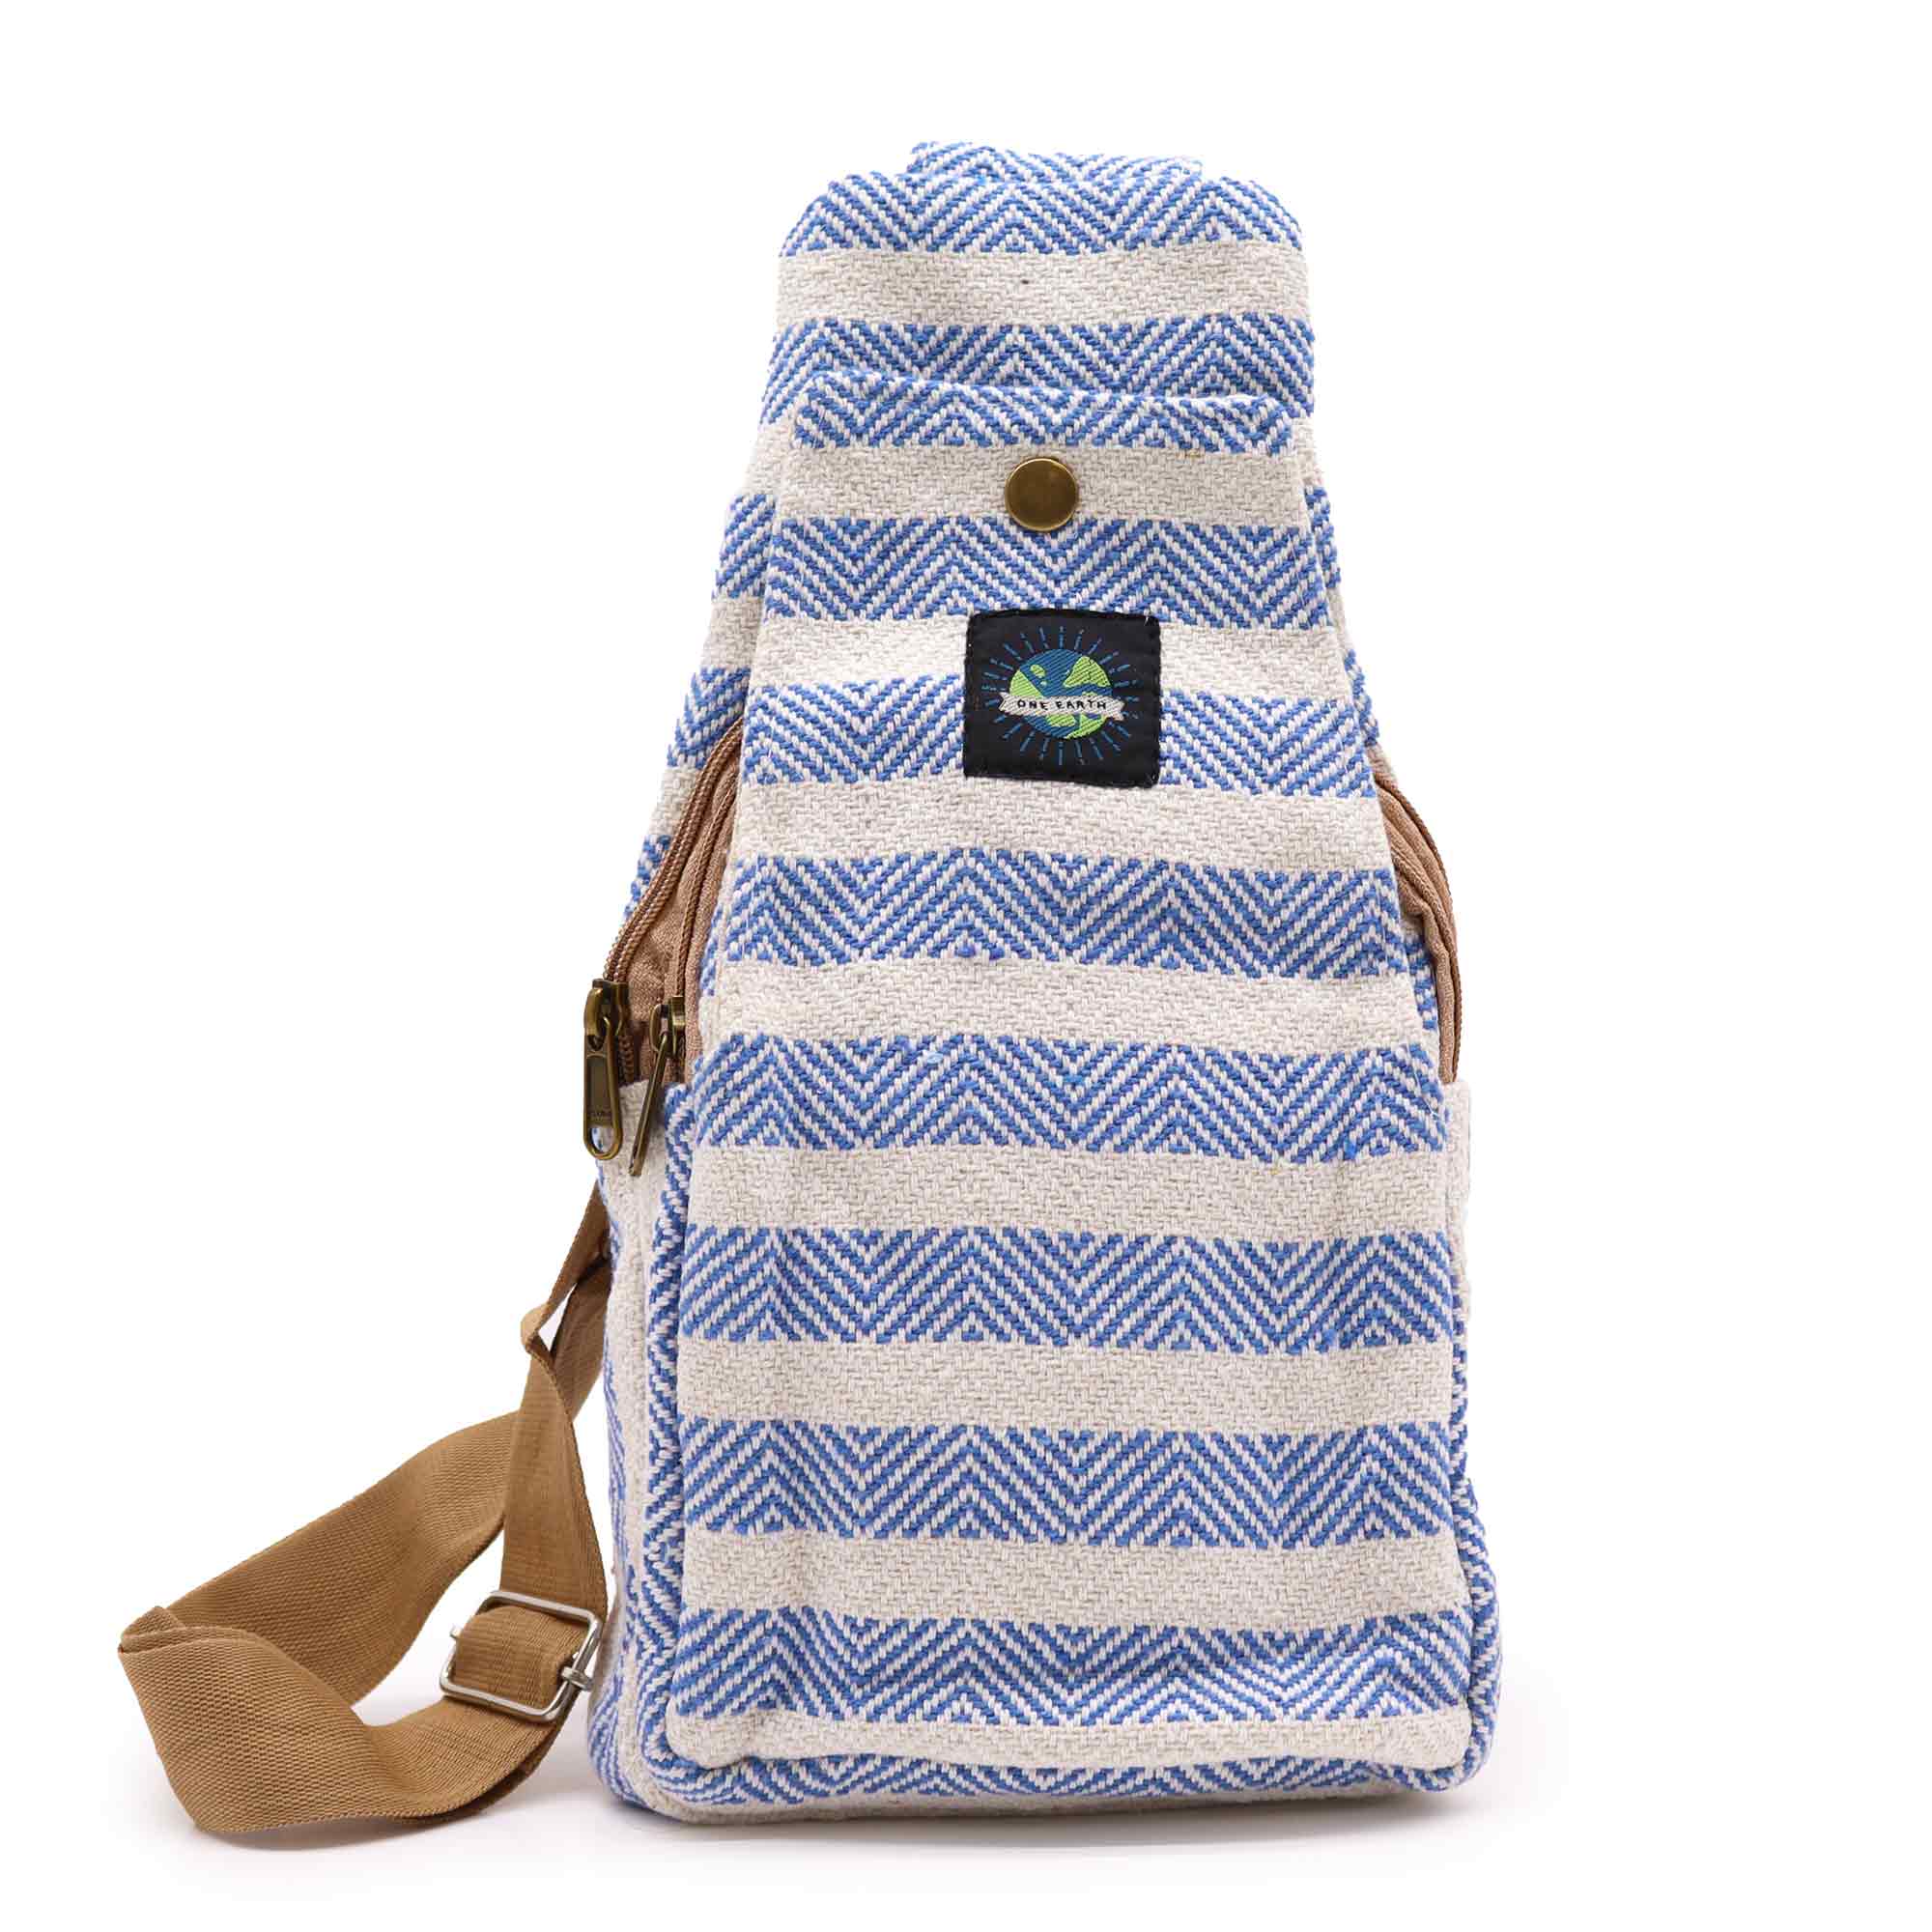 View Body Cross Bag Natural Cotton Blue White information